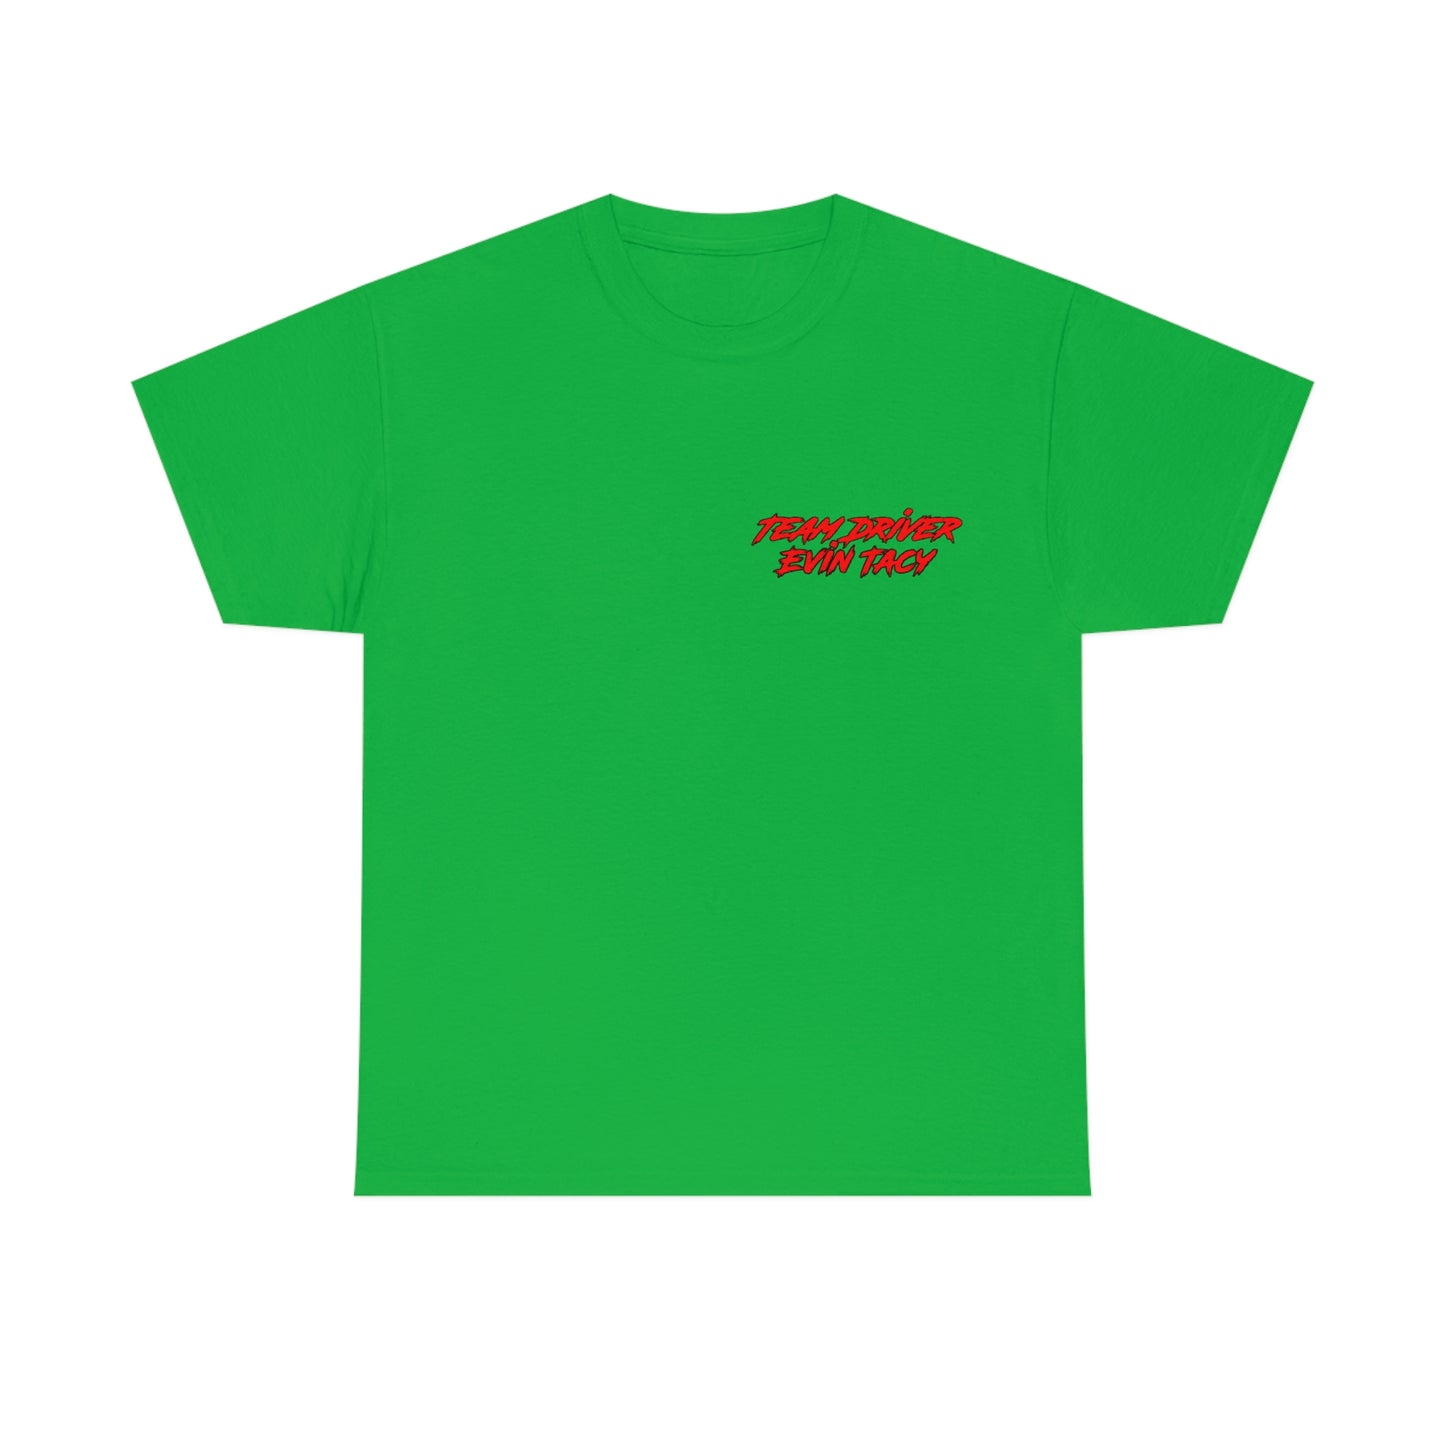 Team Driver Evin Tacy Front Back DinoRc Logo T-Shirt S-5x Black Green